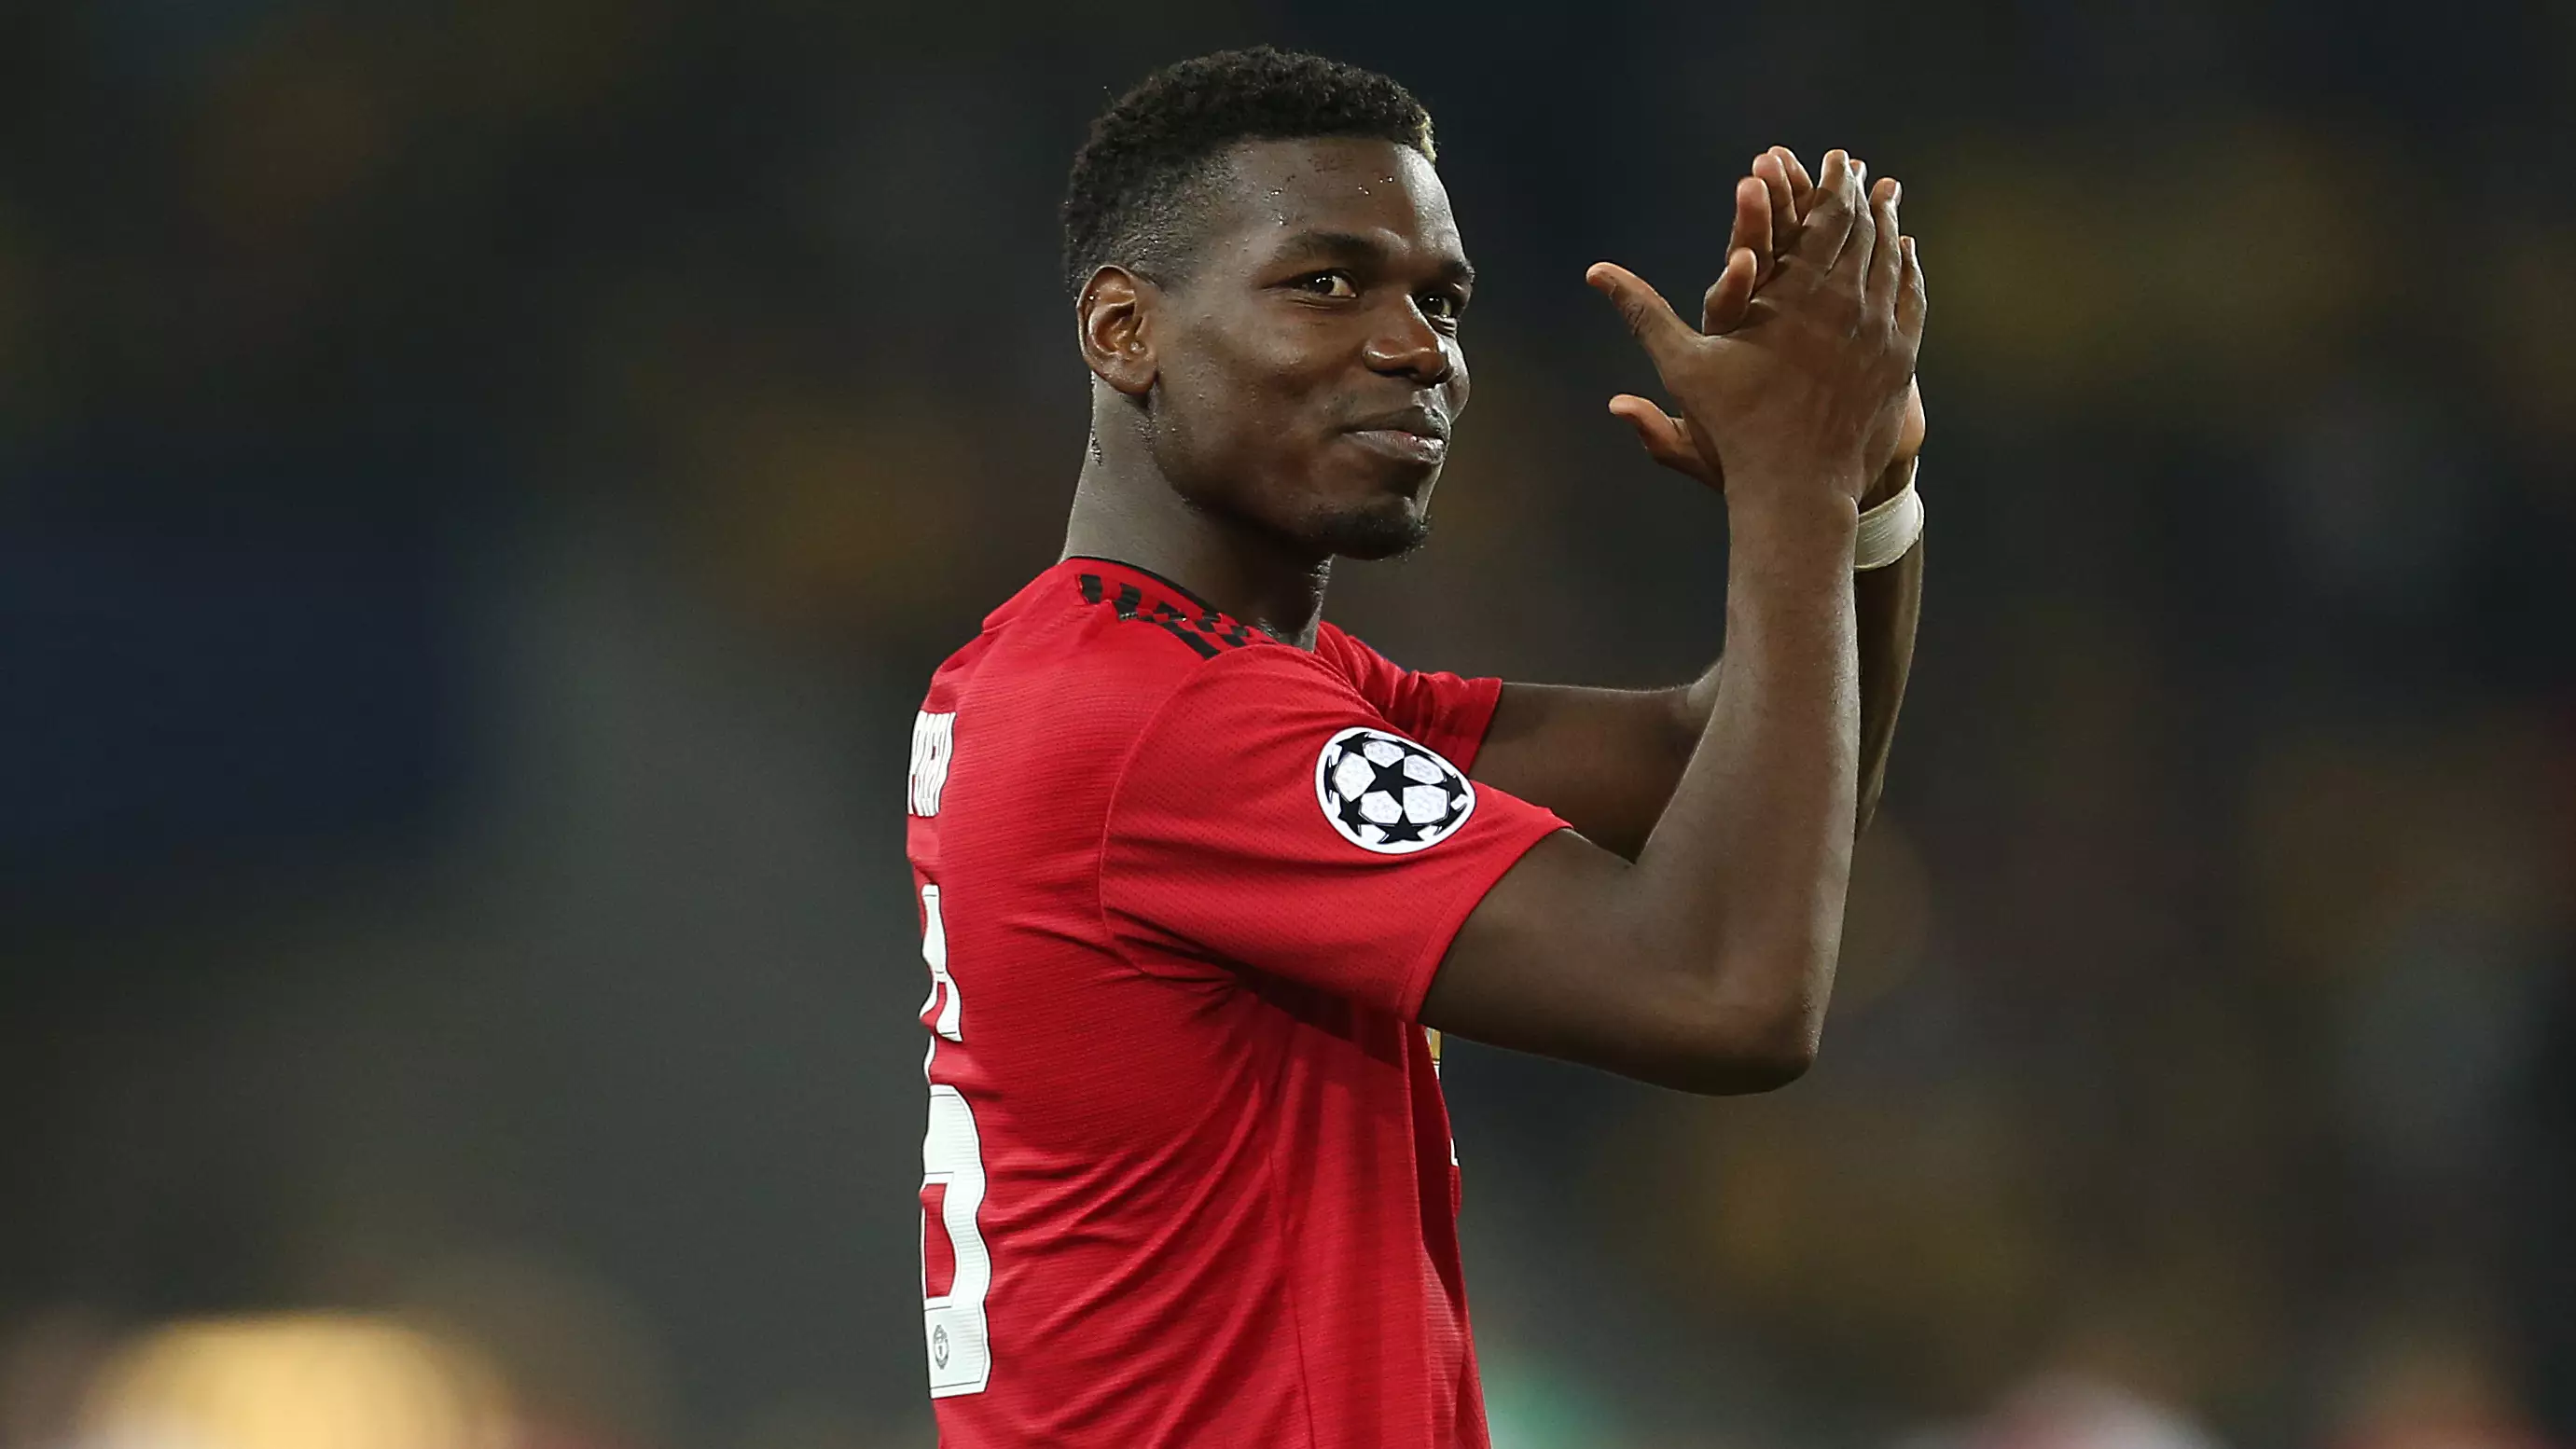 Could Pogba be the final piece of the Real puzzle? Image: PA Images